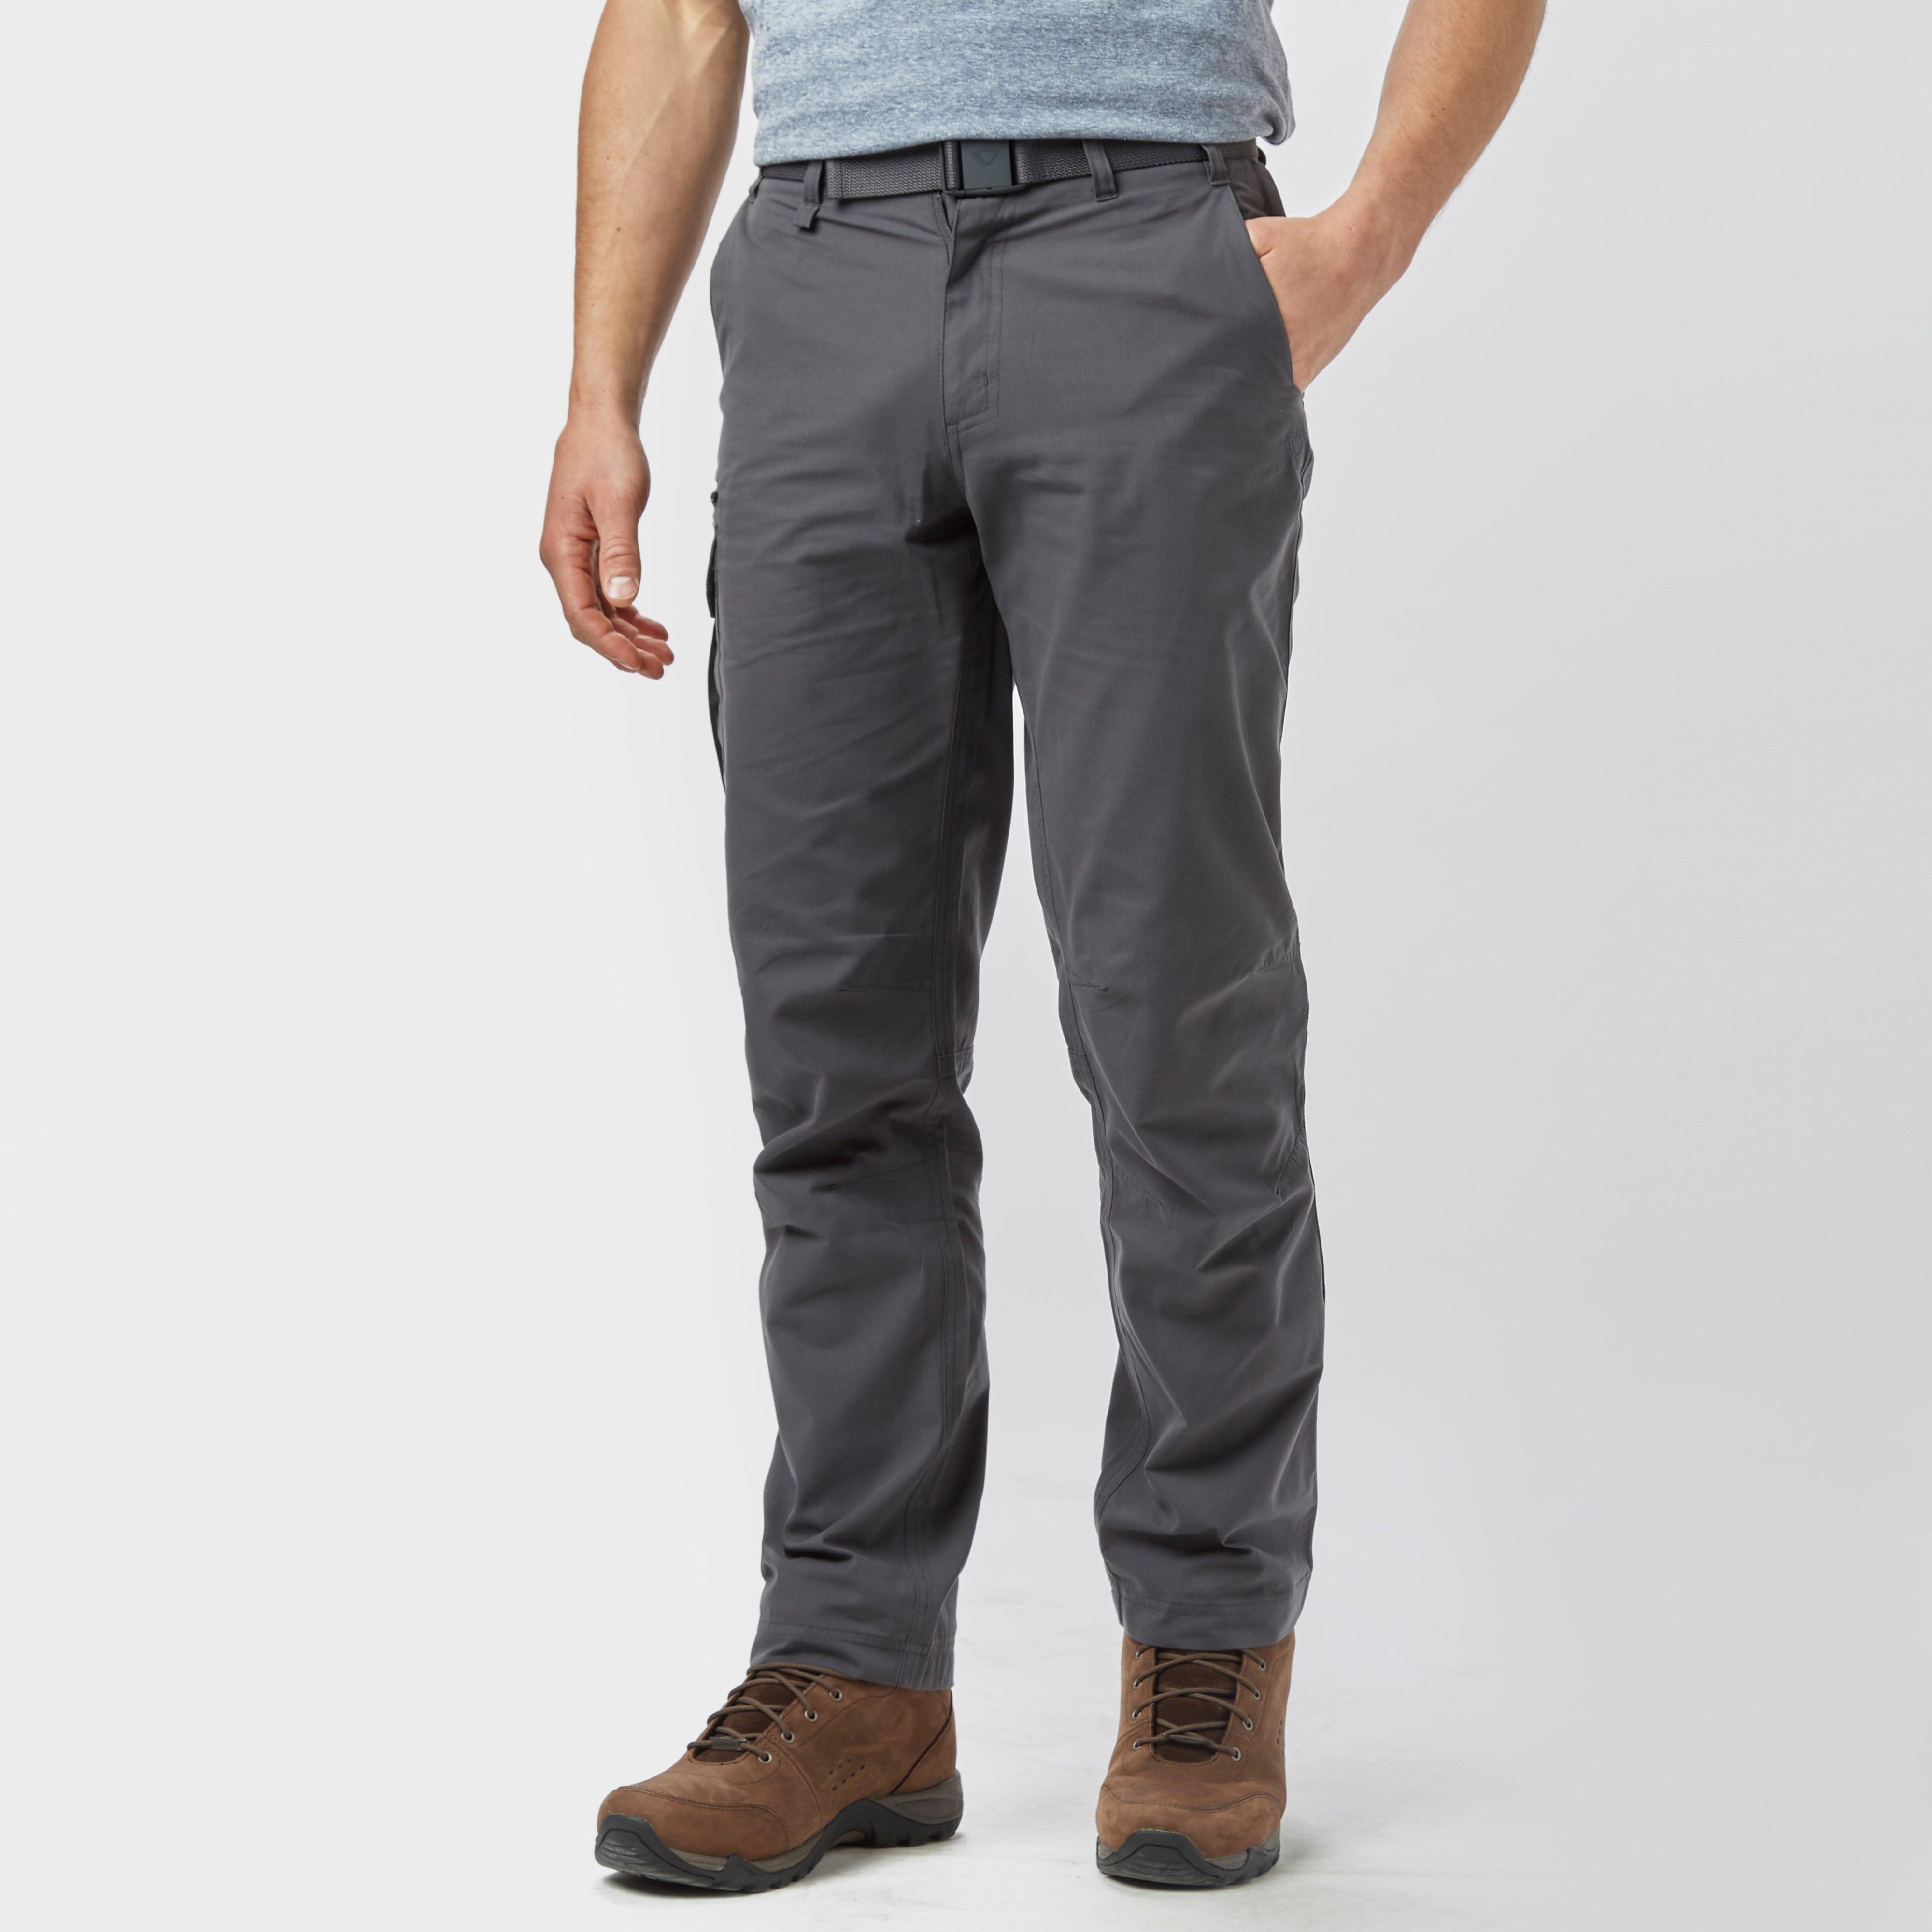 go outdoors mens trousers,OFF 63%,www.concordehotels.com.tr